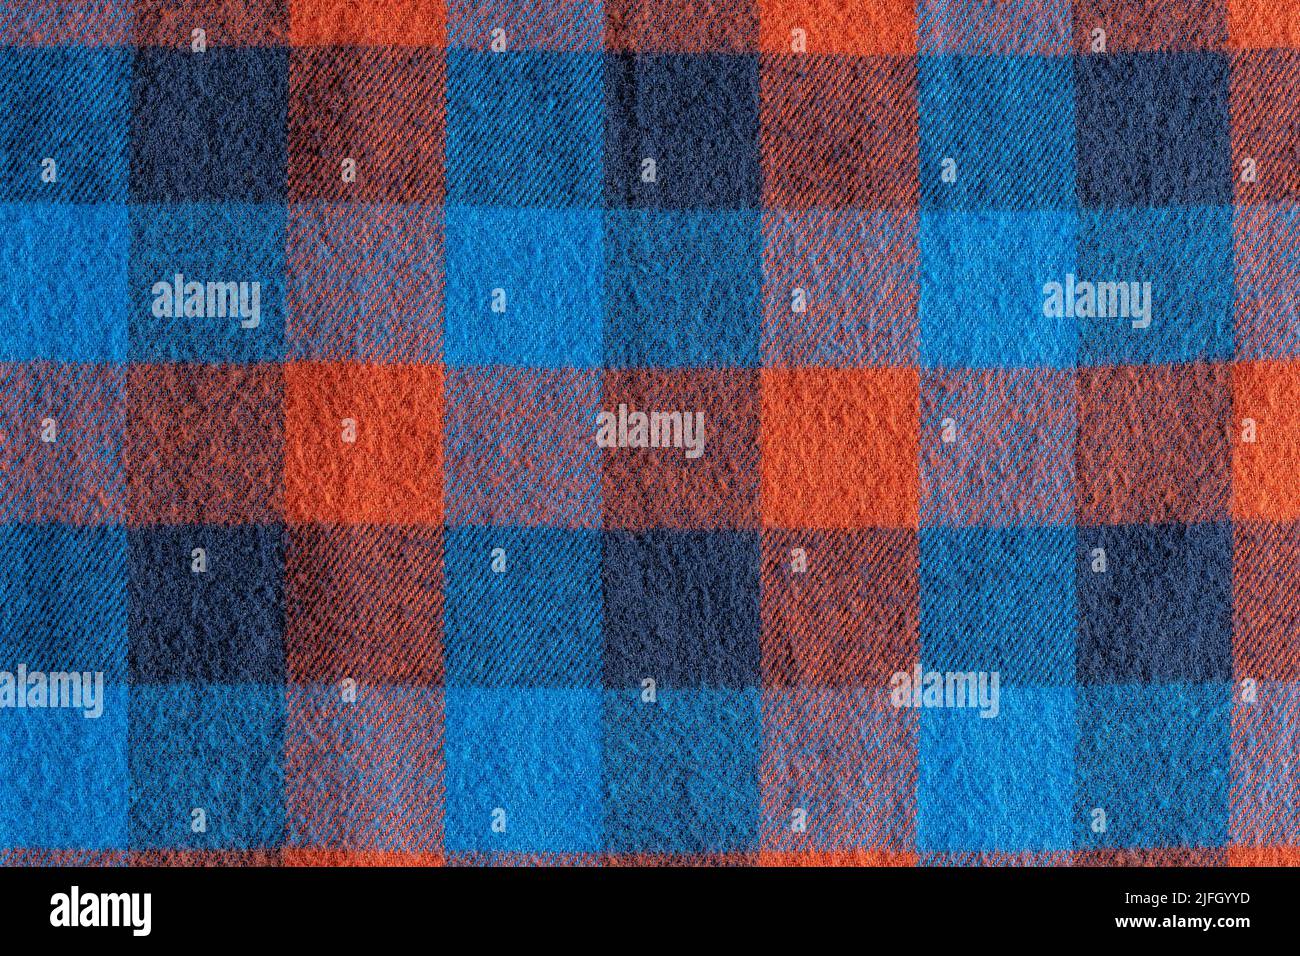 An abstract blue and red checkered fabric background or texture Stock Photo